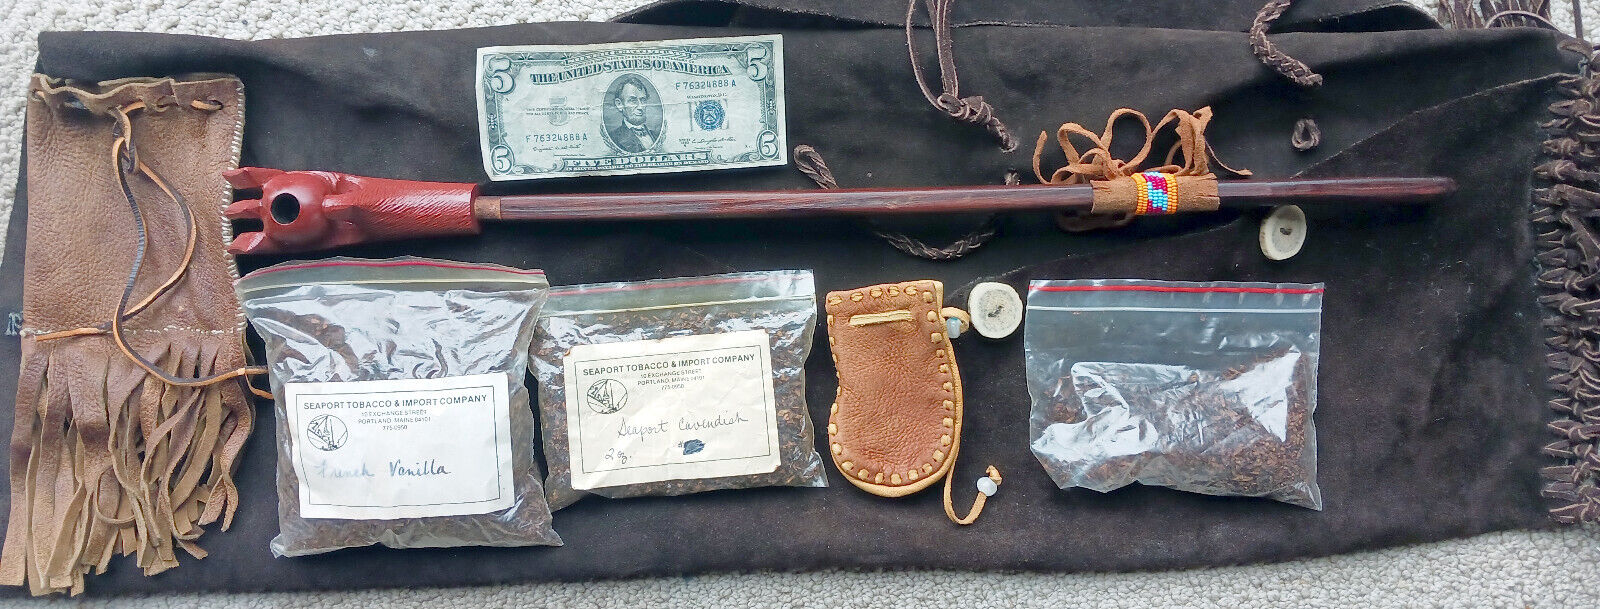 Handmade Native American Peace Pipestone Pipe Deer Antler Leather Case 3 Pouches